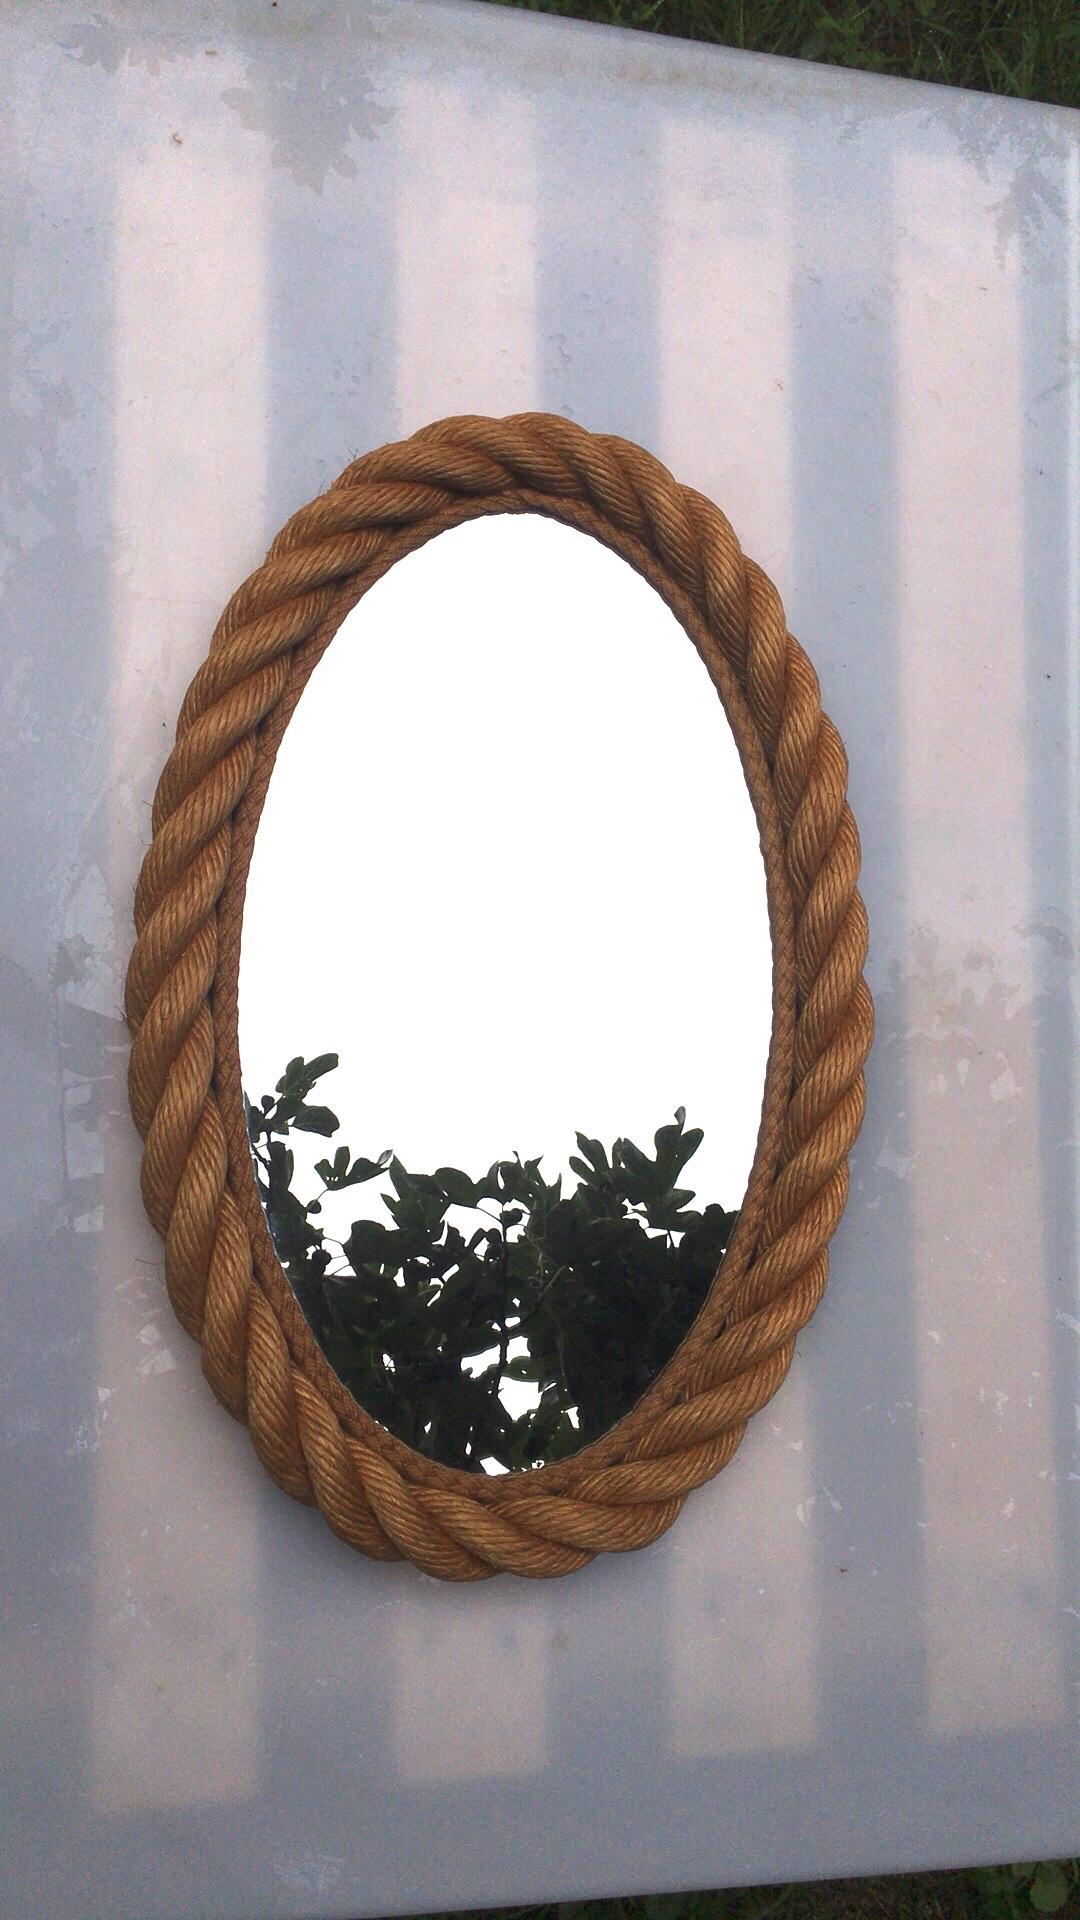 Oval rope mirror Audoux Minet, circa 1960 from South of France.